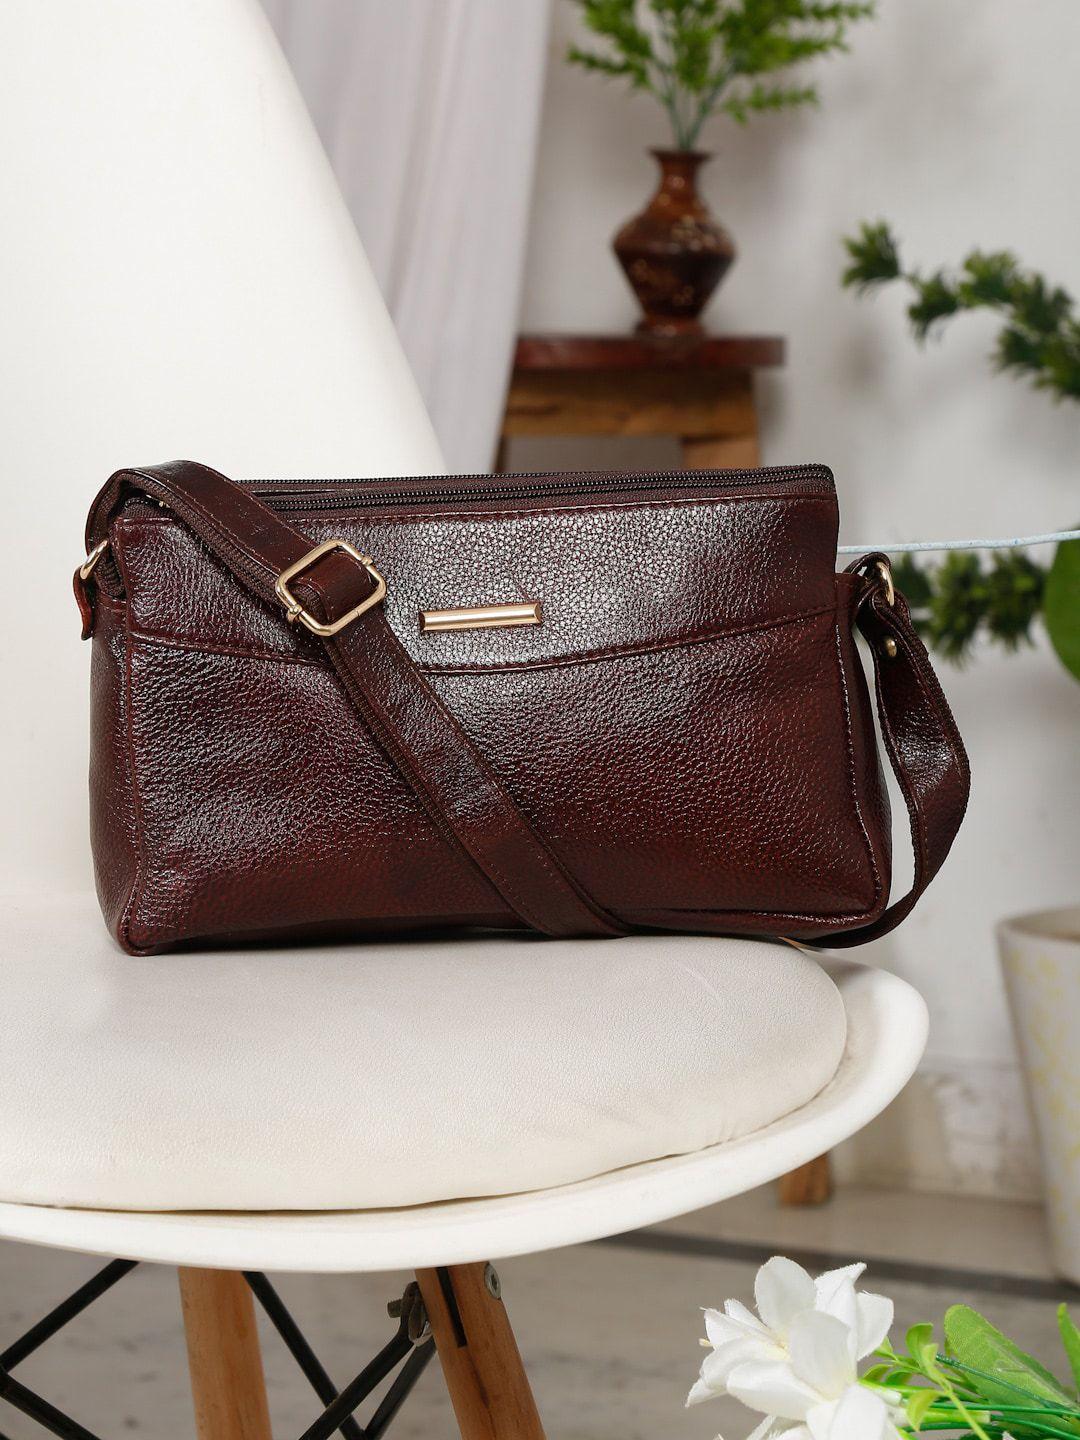 teakwood-leathers-textured-leather-structured-sling-bag